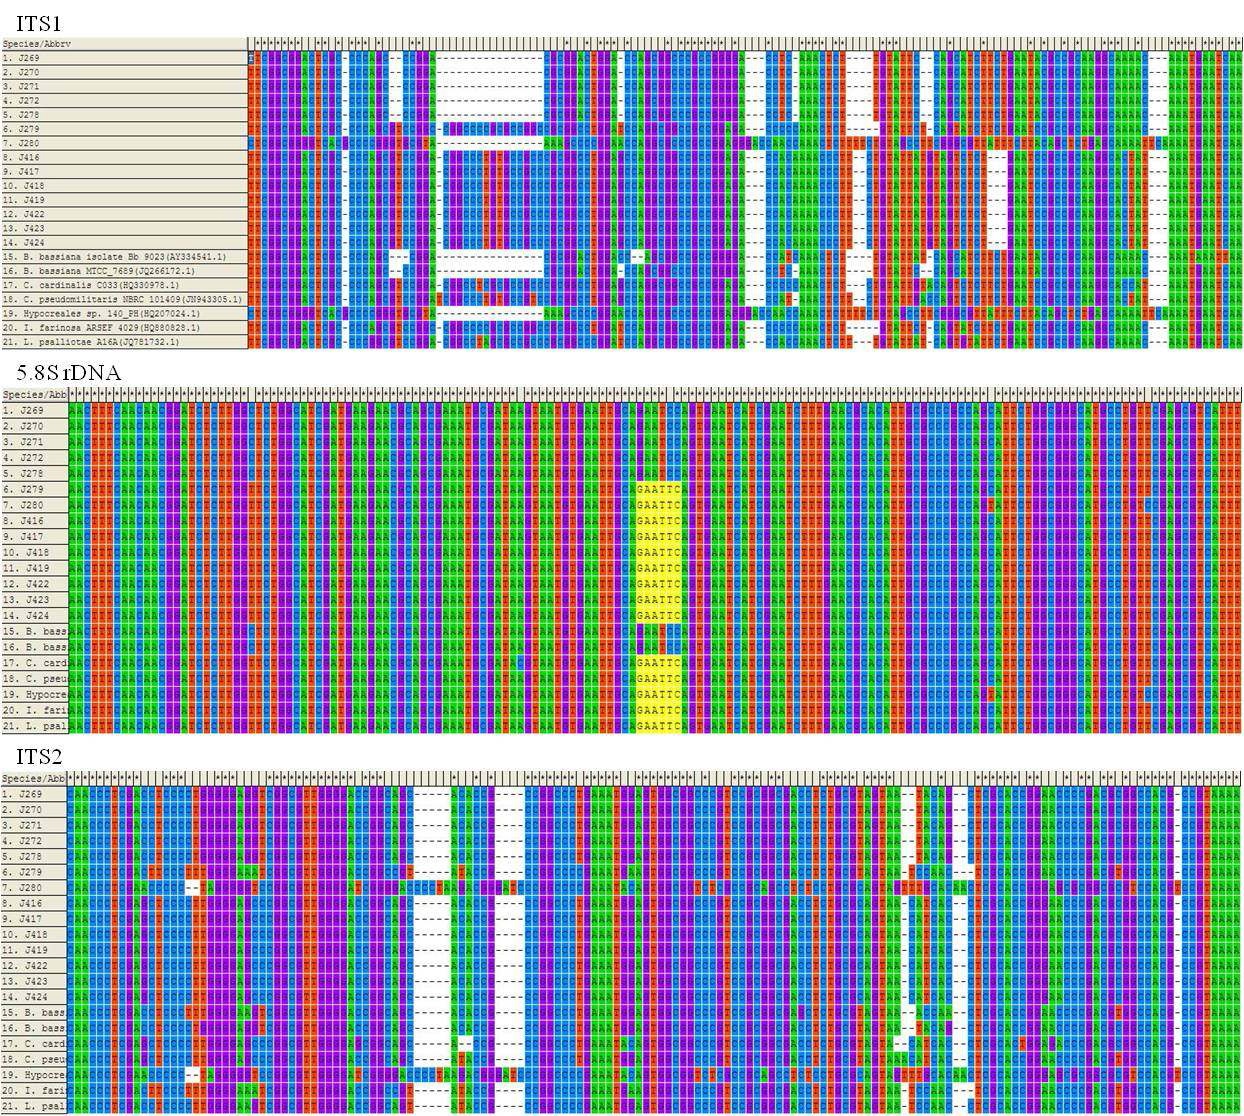 Graphical view of sequence variation in ITS1-5.8S rDNA-ITS2 region of peruvian entomopathogenic fungi.